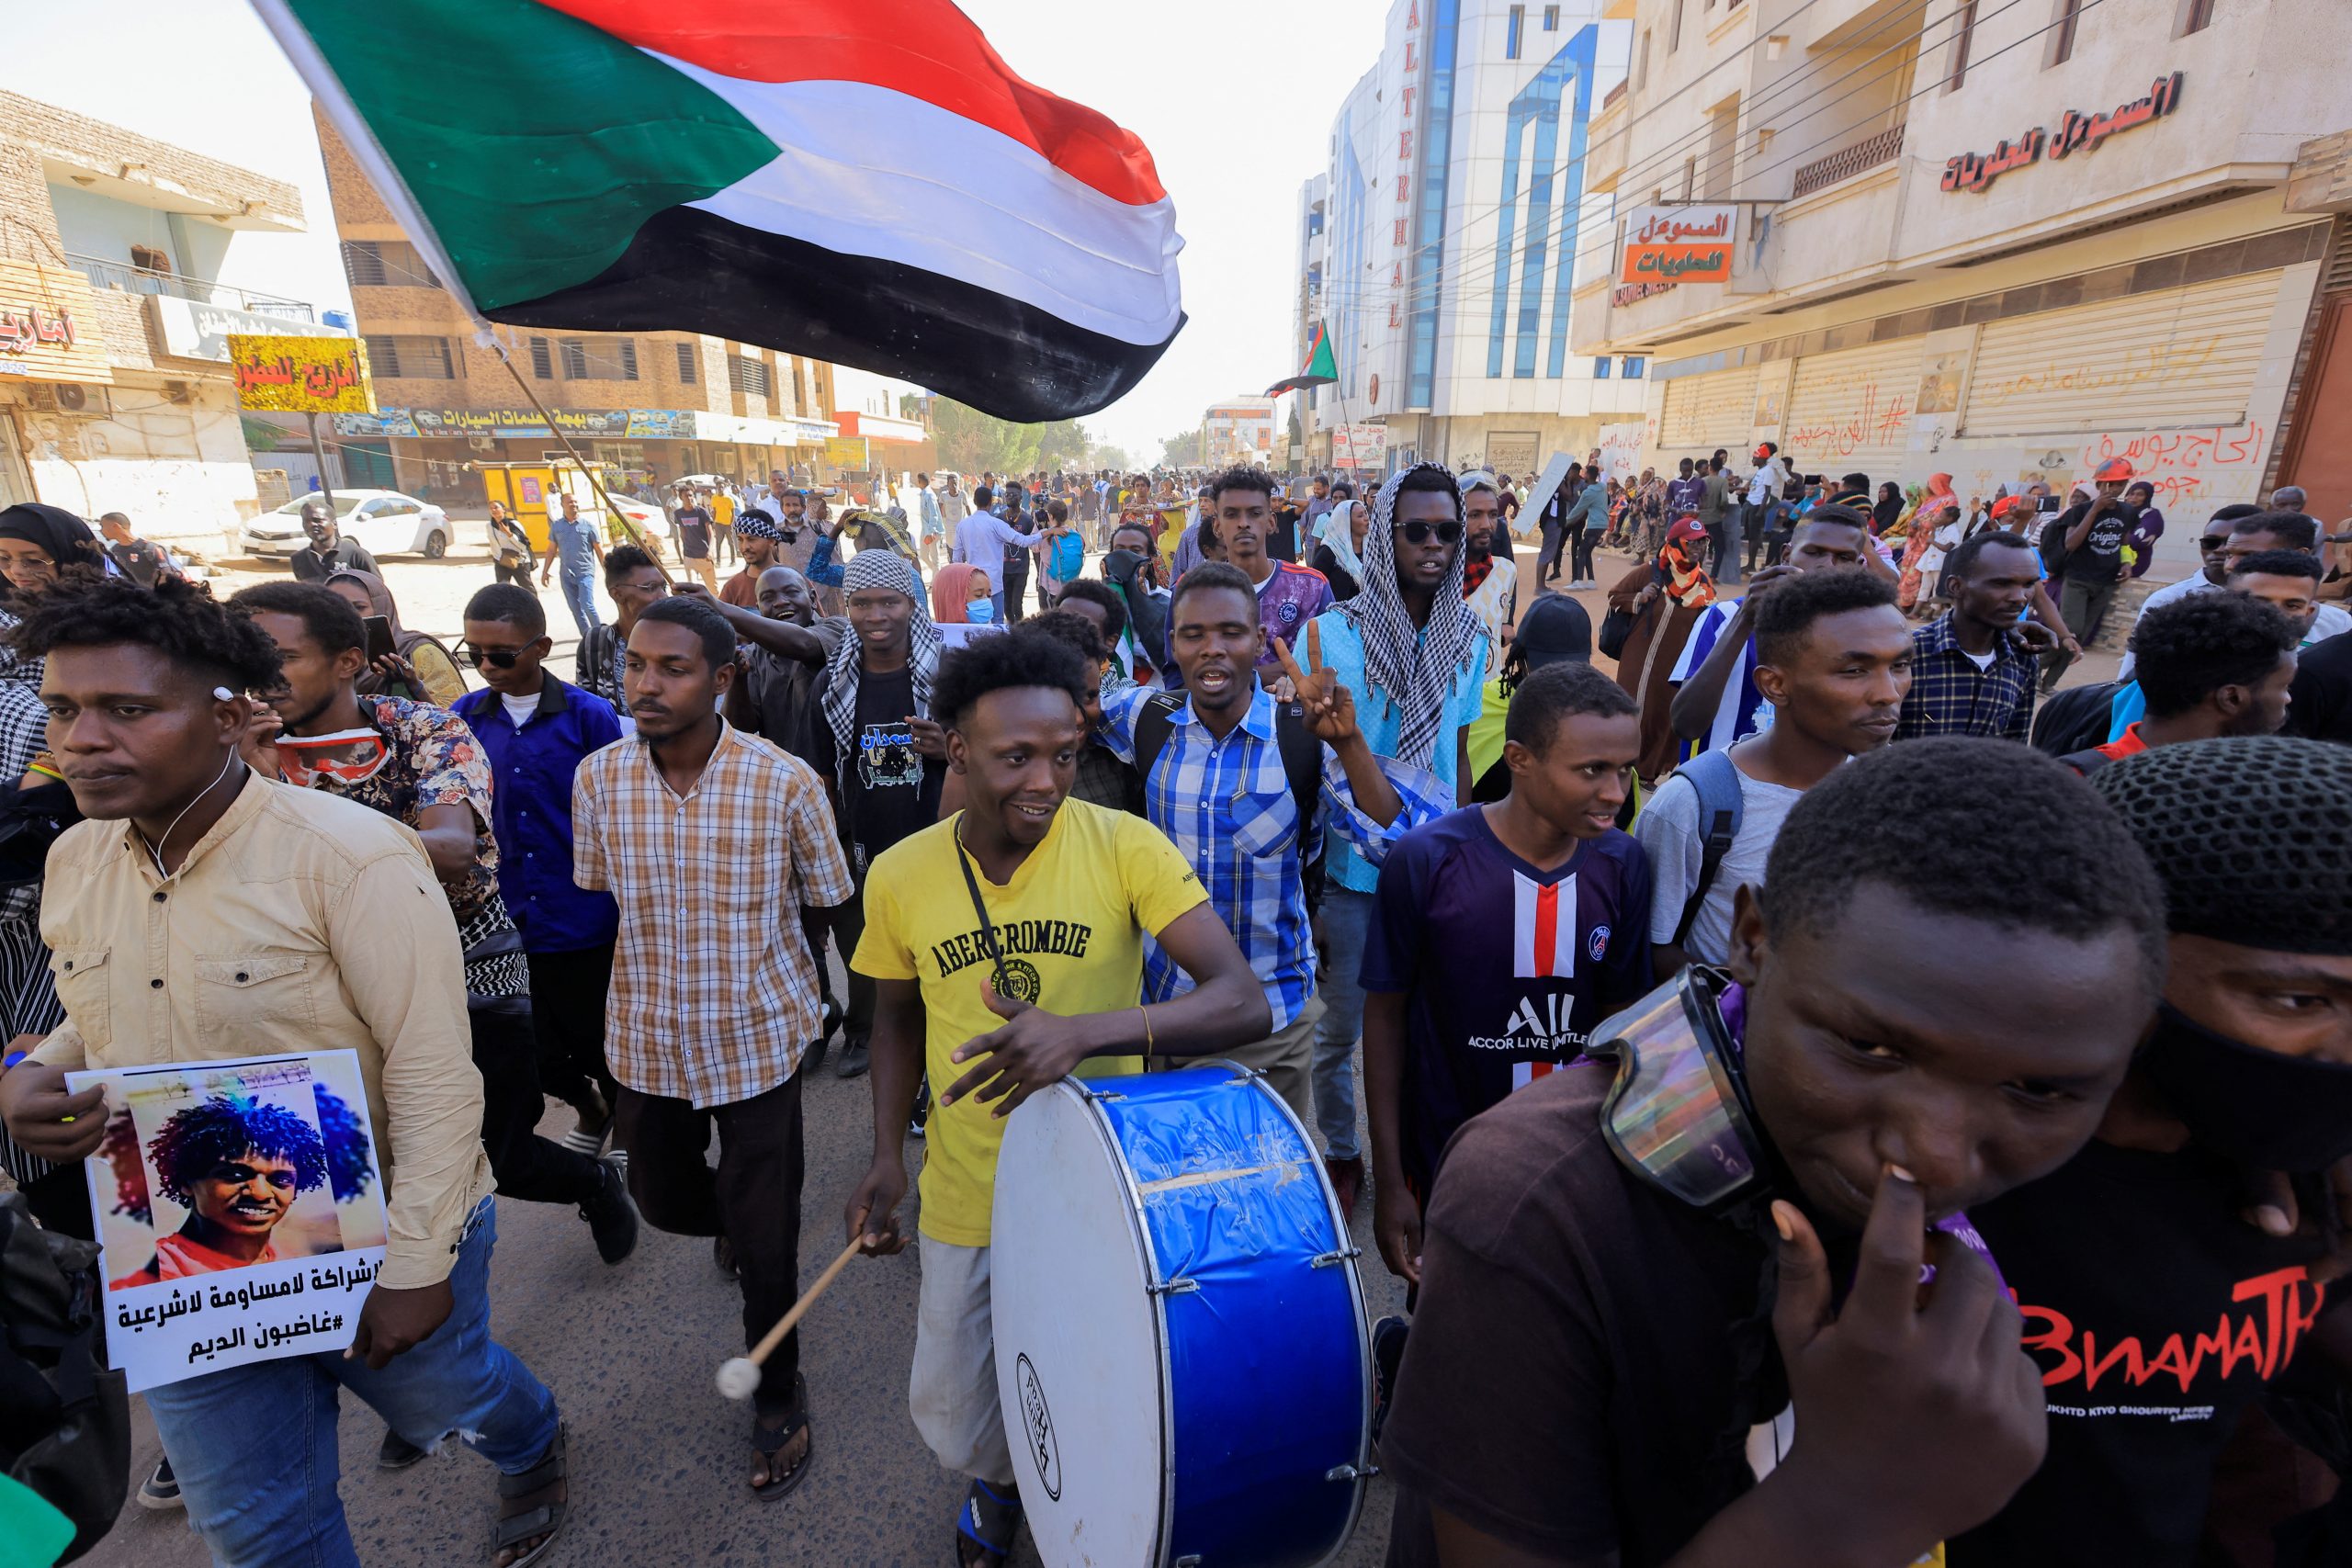 To stop the fighting in Sudan, take away the generals’ money